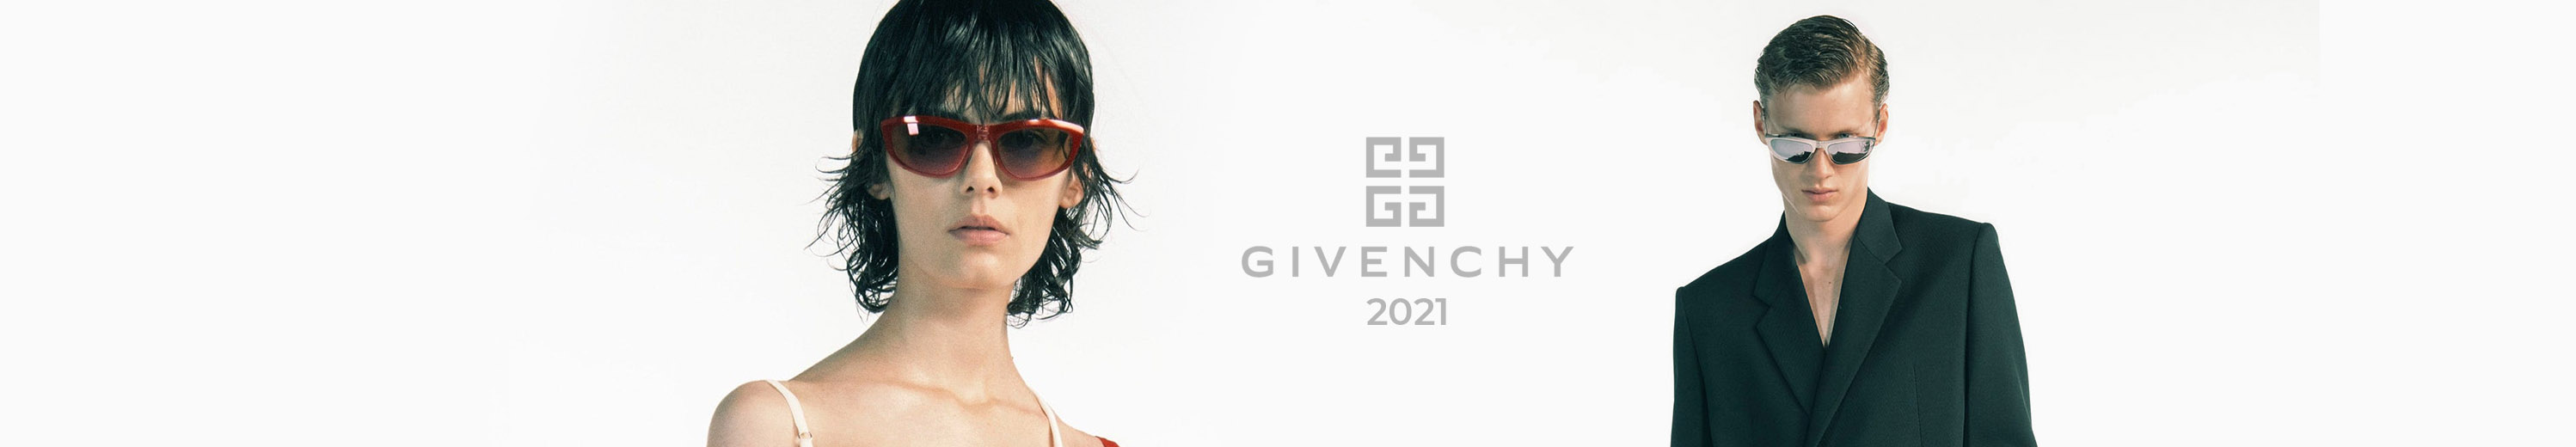 Givenchy 2021 Spring / Summer Eyewear Collection